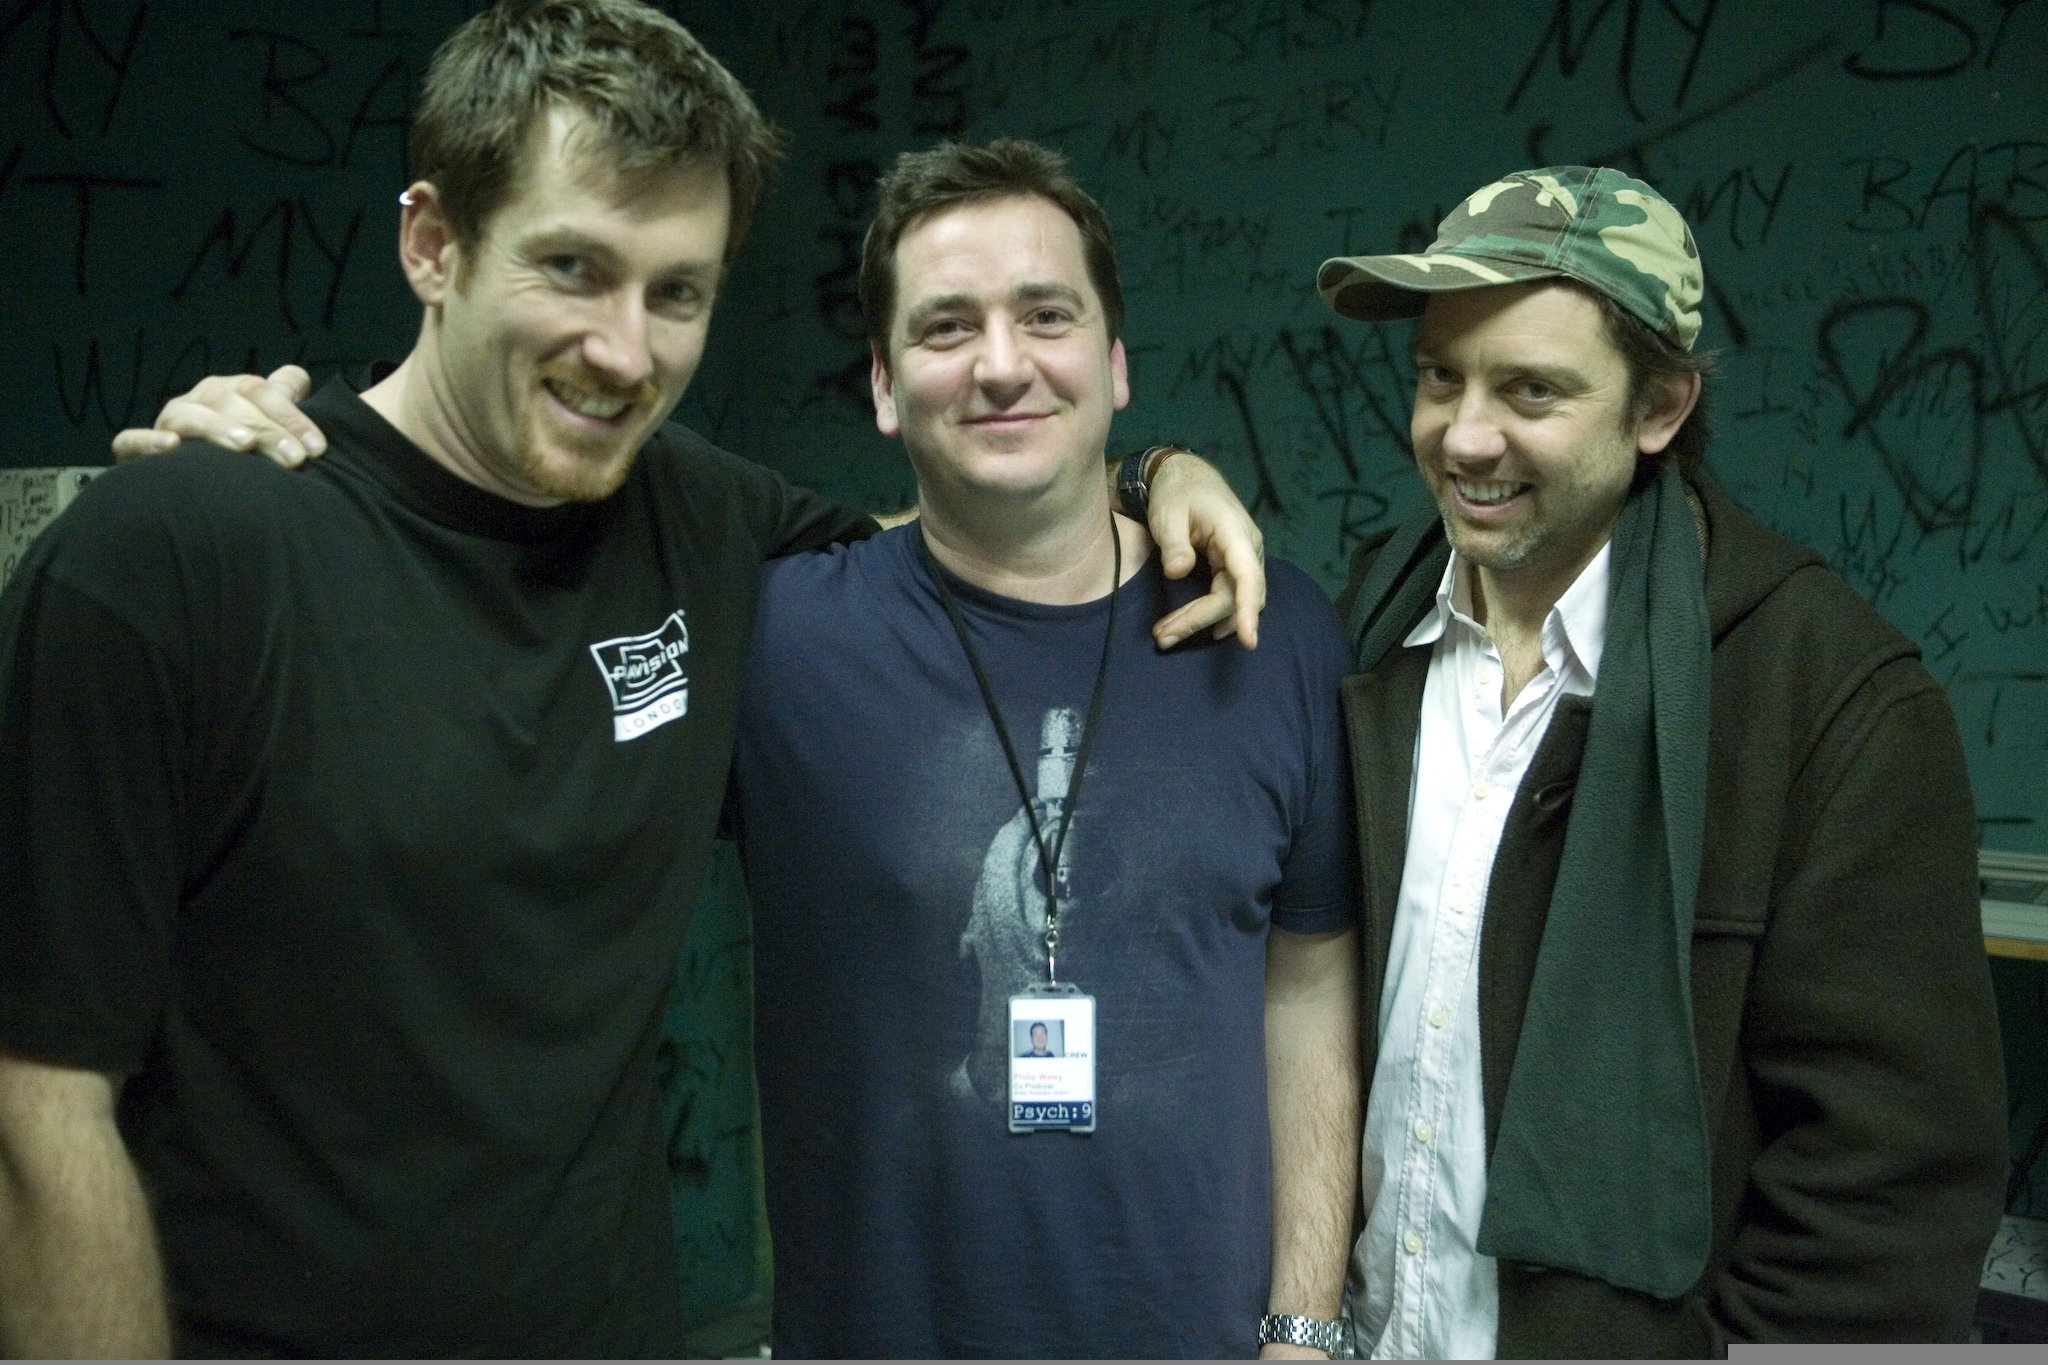 Cinematographer Shane Daly, Producer Philip Waley, Director Christopher Watson